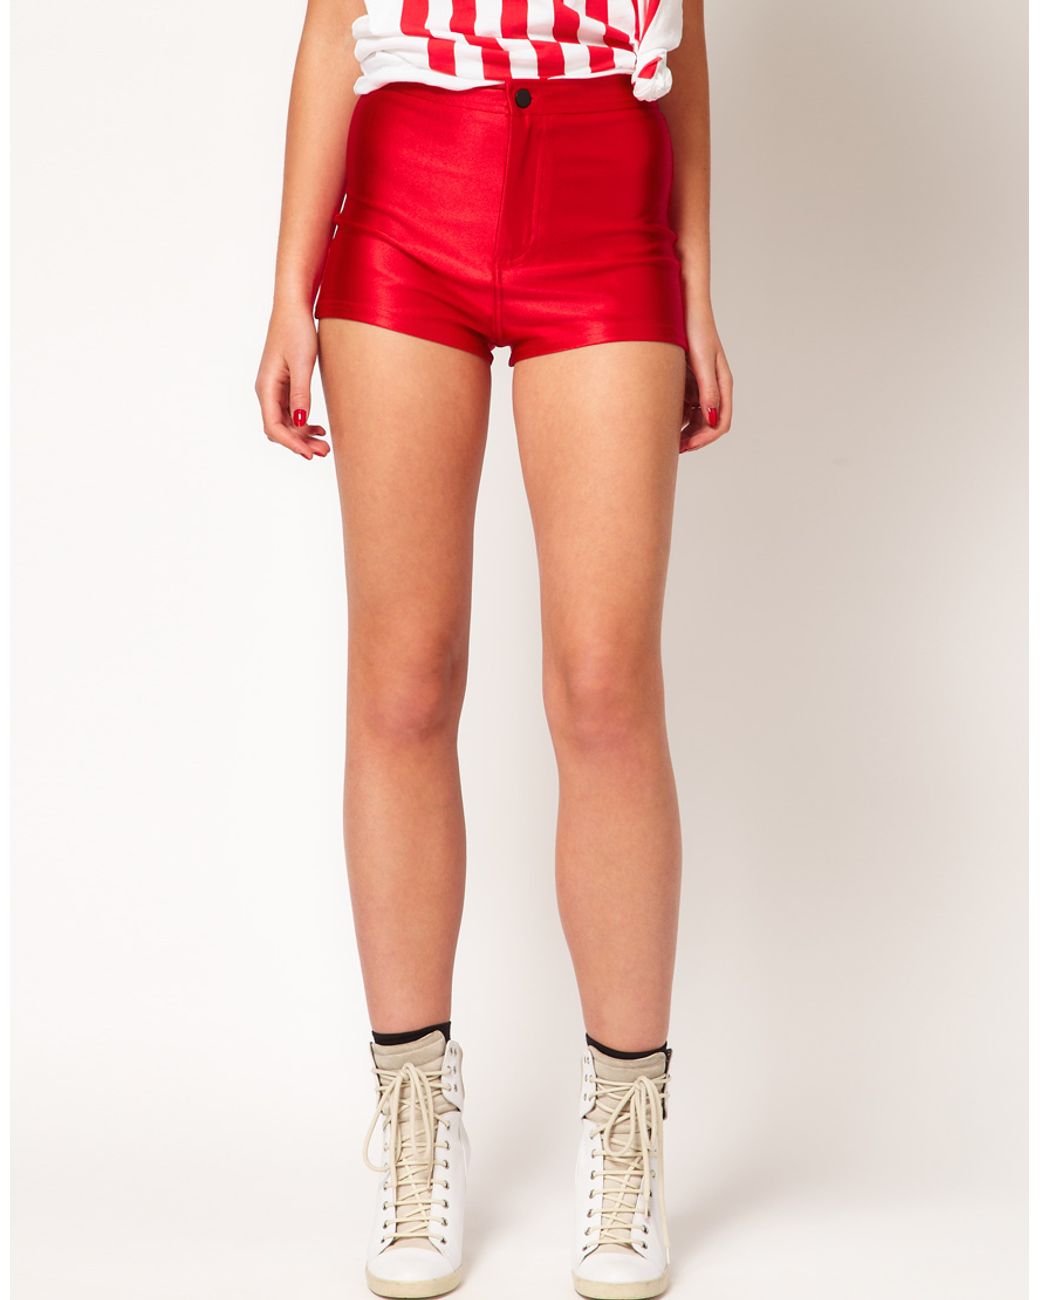 American Apparel American Apparel Disco Shorts in Red  Lyst